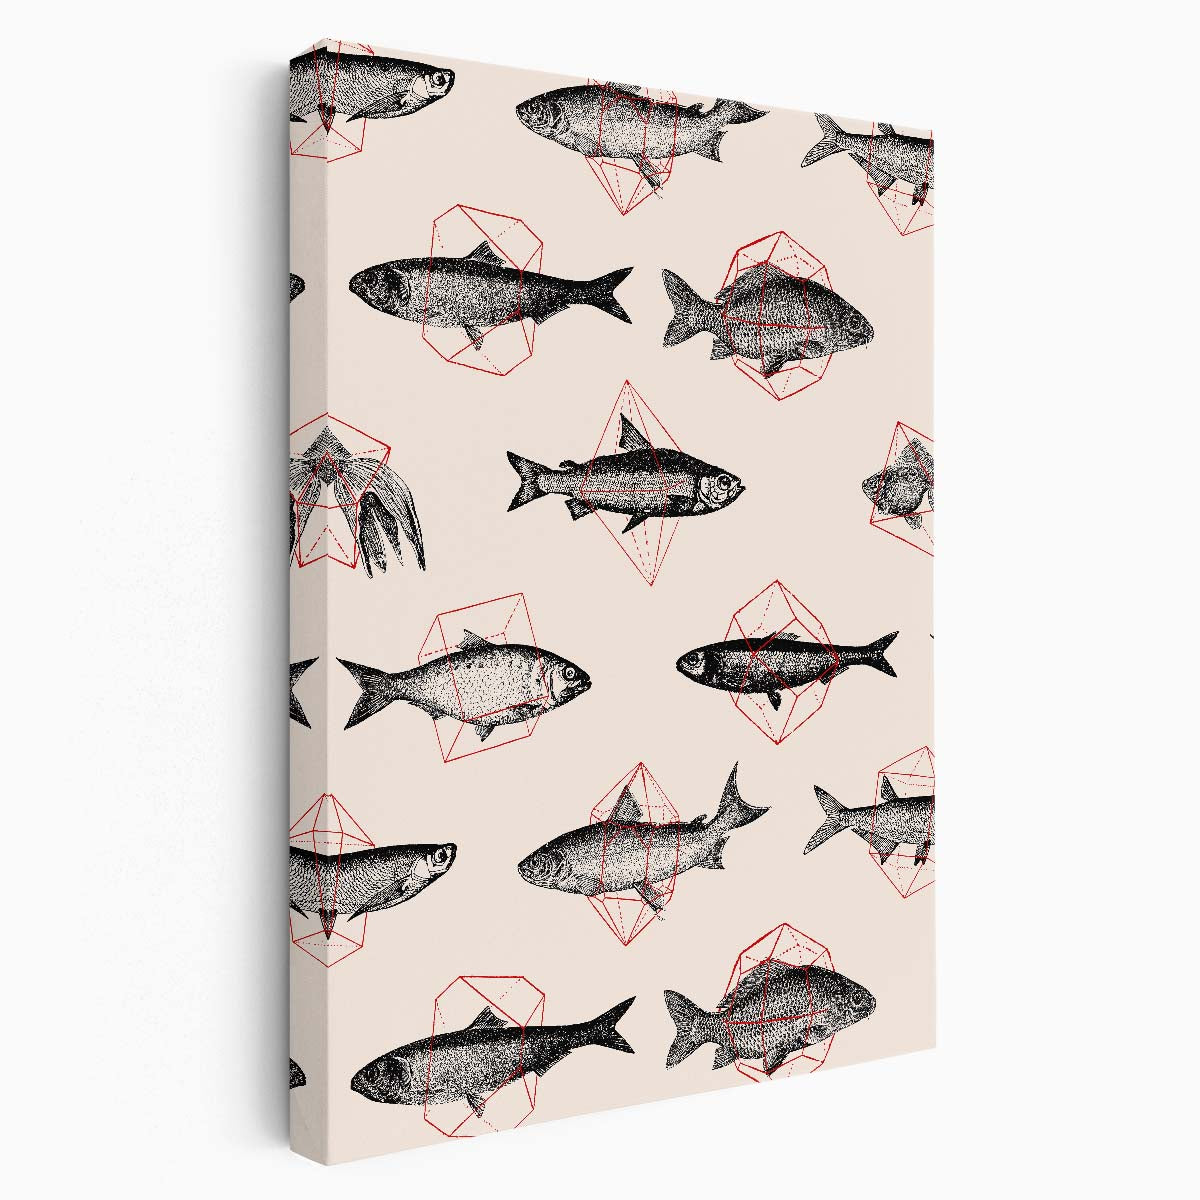 Geometric Fish Illustration, Abstract Animal Wall Art on White Background by Luxuriance Designs, made in USA